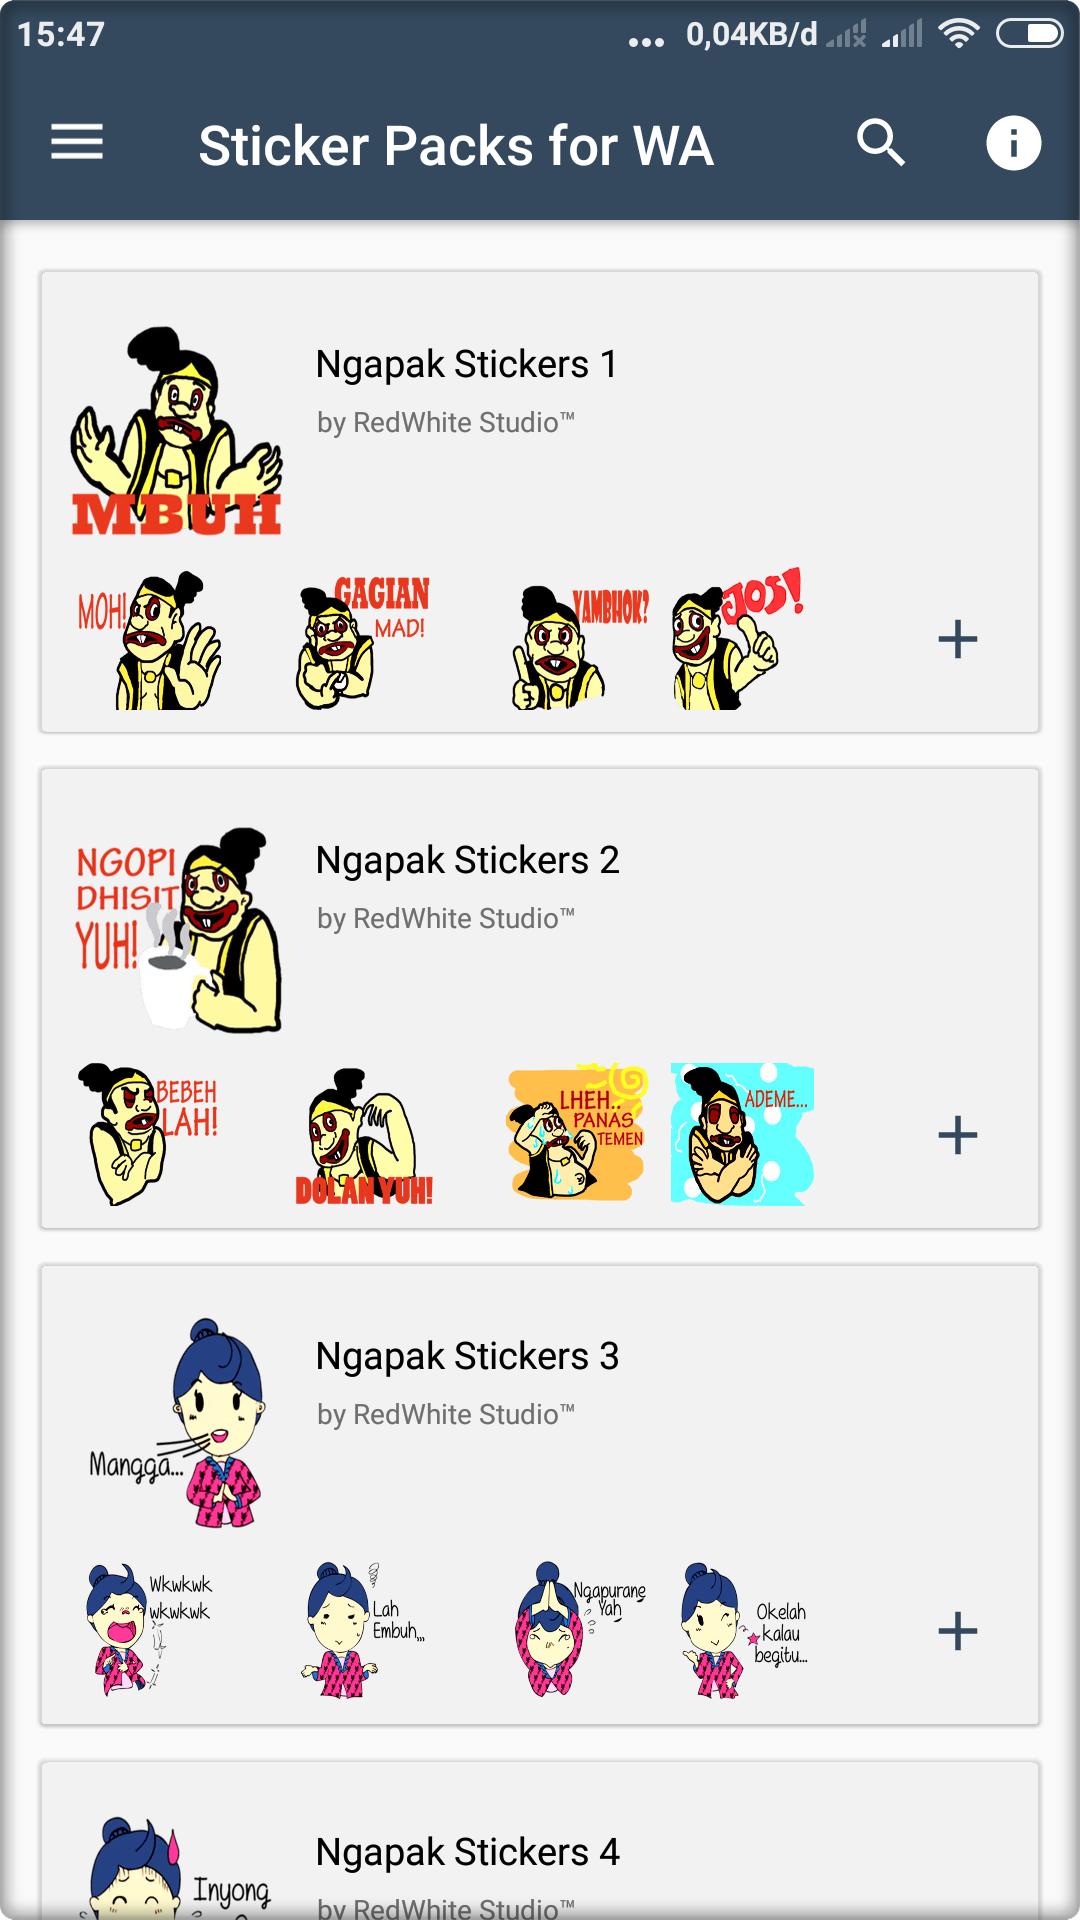 Stiker Ngapak Lucu Wastickerapps For Android Apk Download